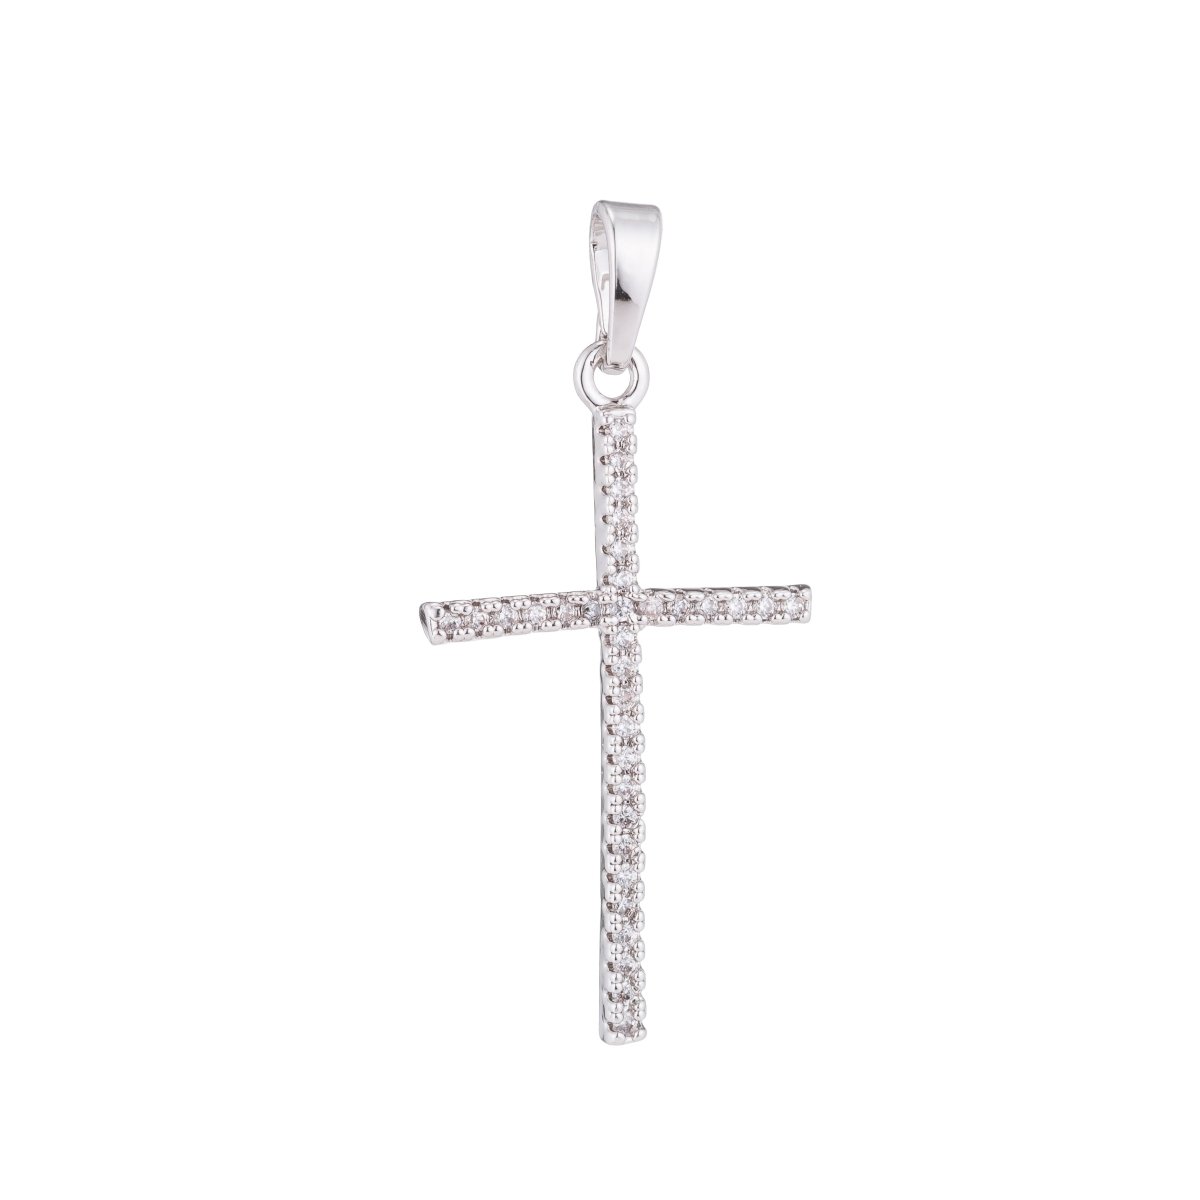 Dainty 24k Gold Filled Cross Charm Micro Pave Cross Pendant for Necklace Minimalist Religious Jewelry Making Supply H-022 H-136 - DLUXCA